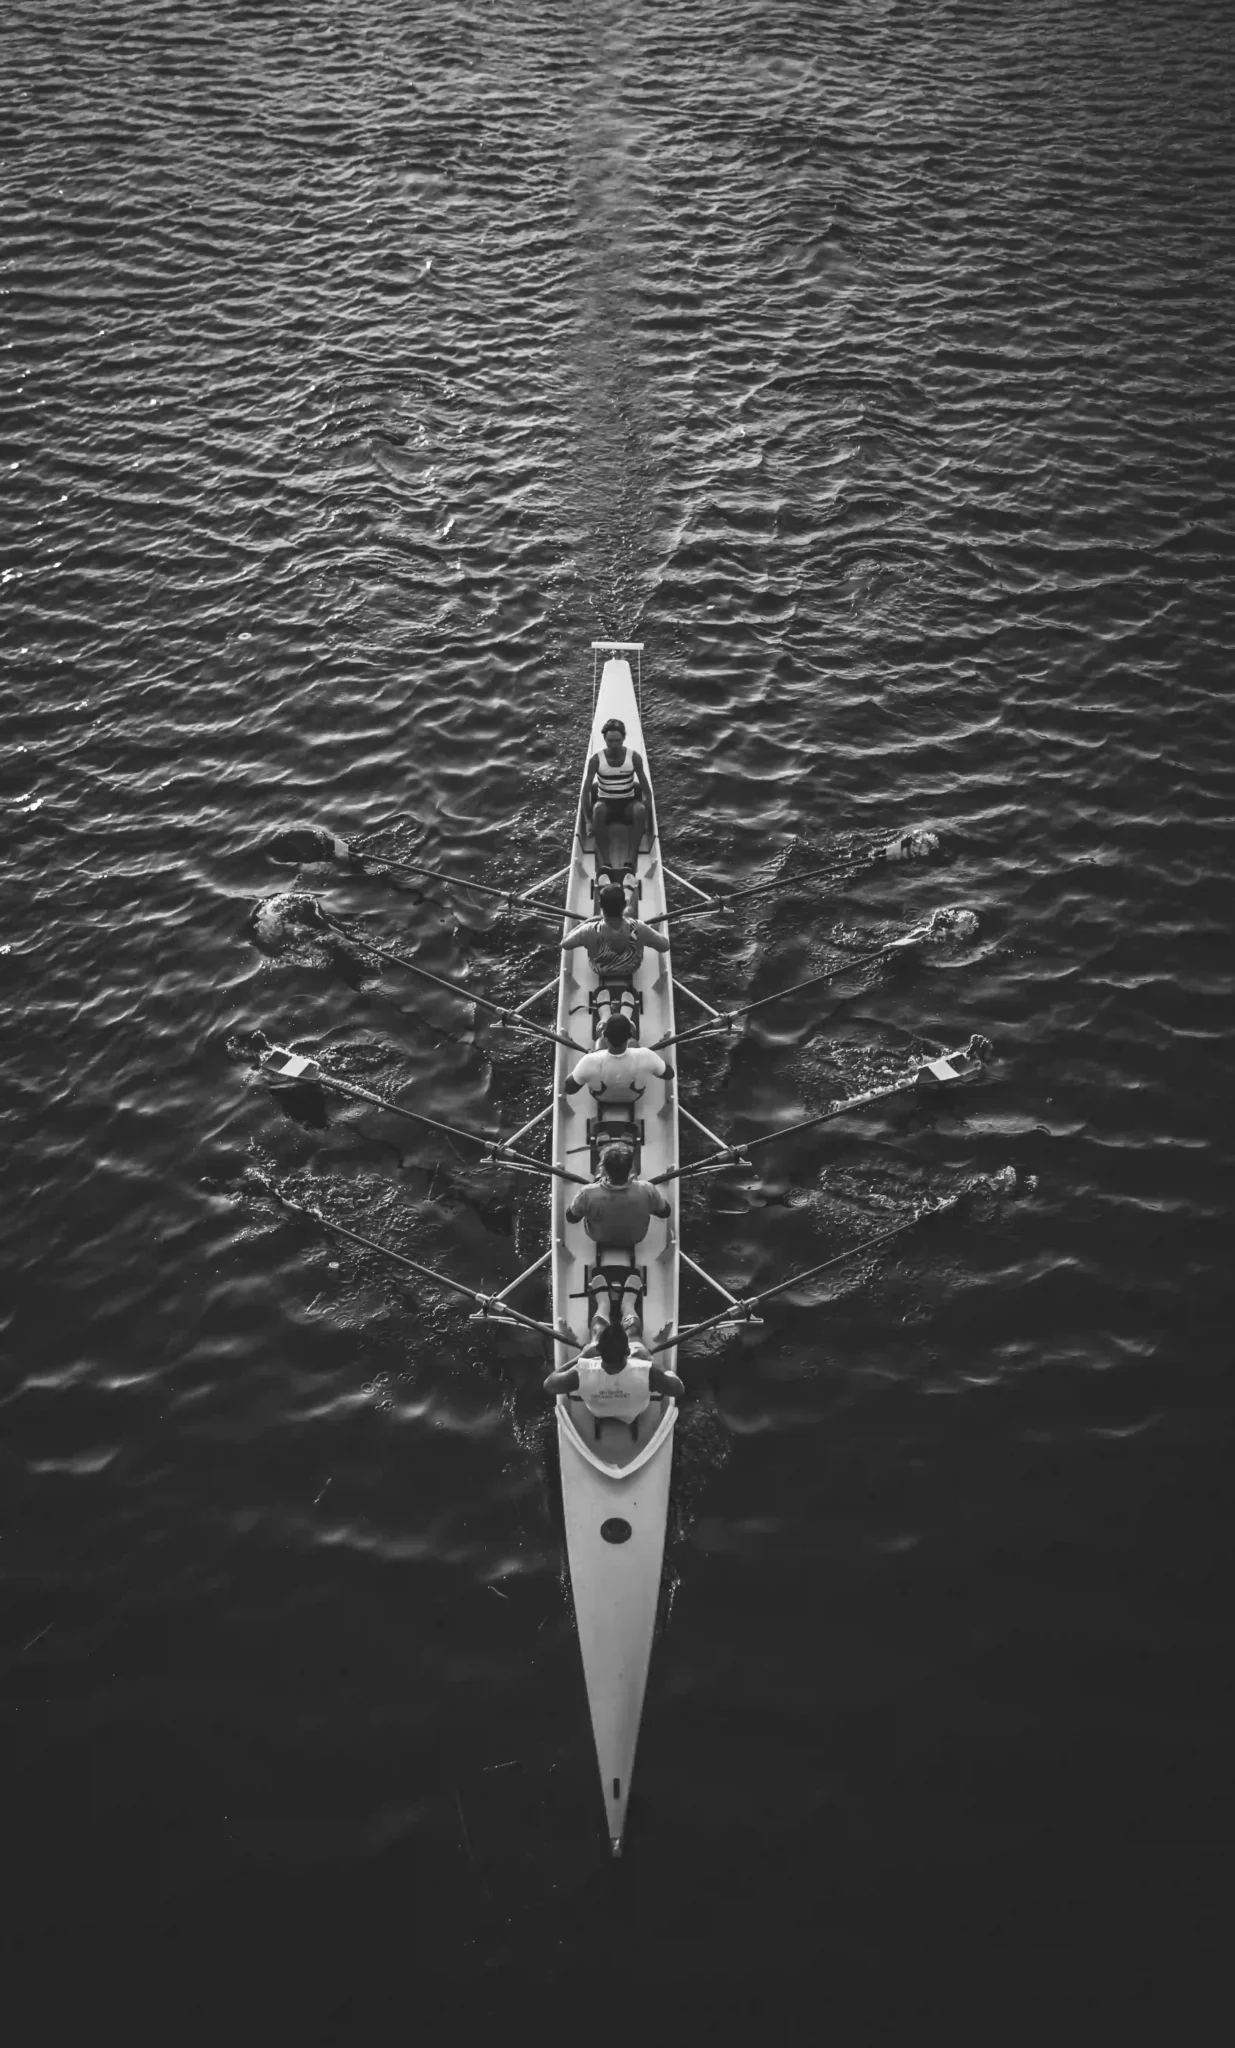 Image representing a rowing team, symbolizing mutual aid and the collaborative economy.